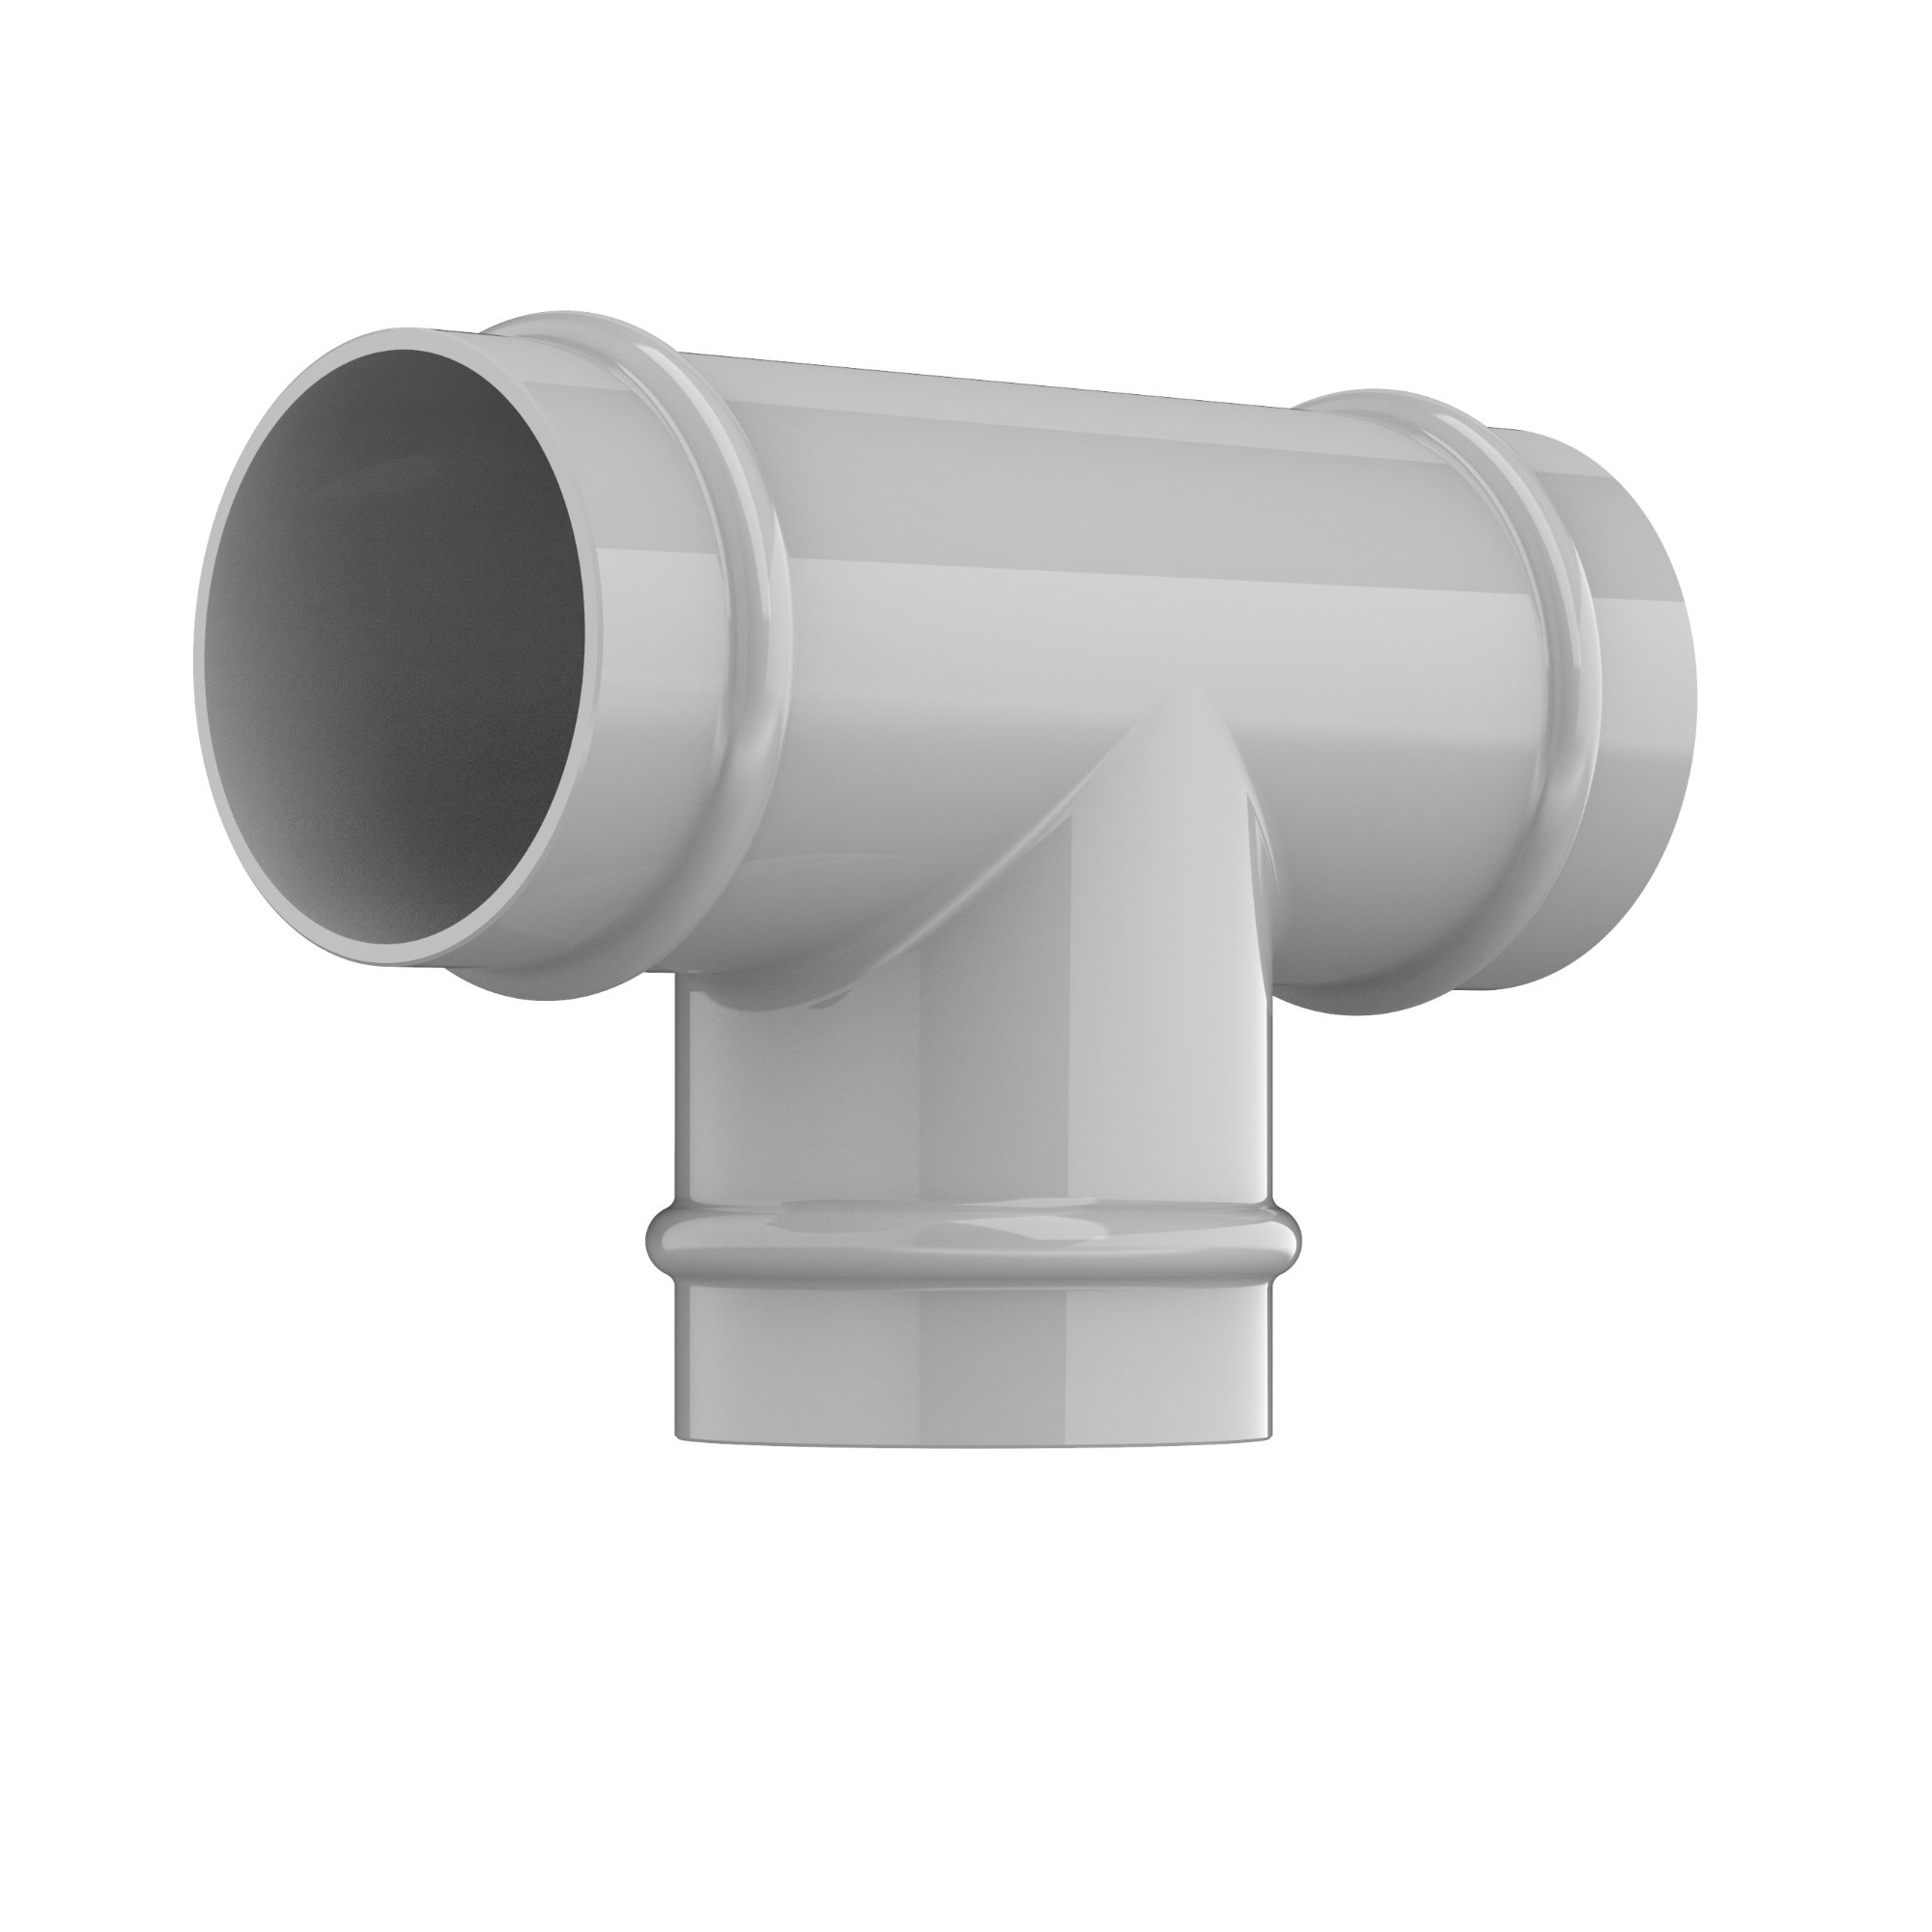 Aluminum compressed air pipe fittings - application of Equal Tee